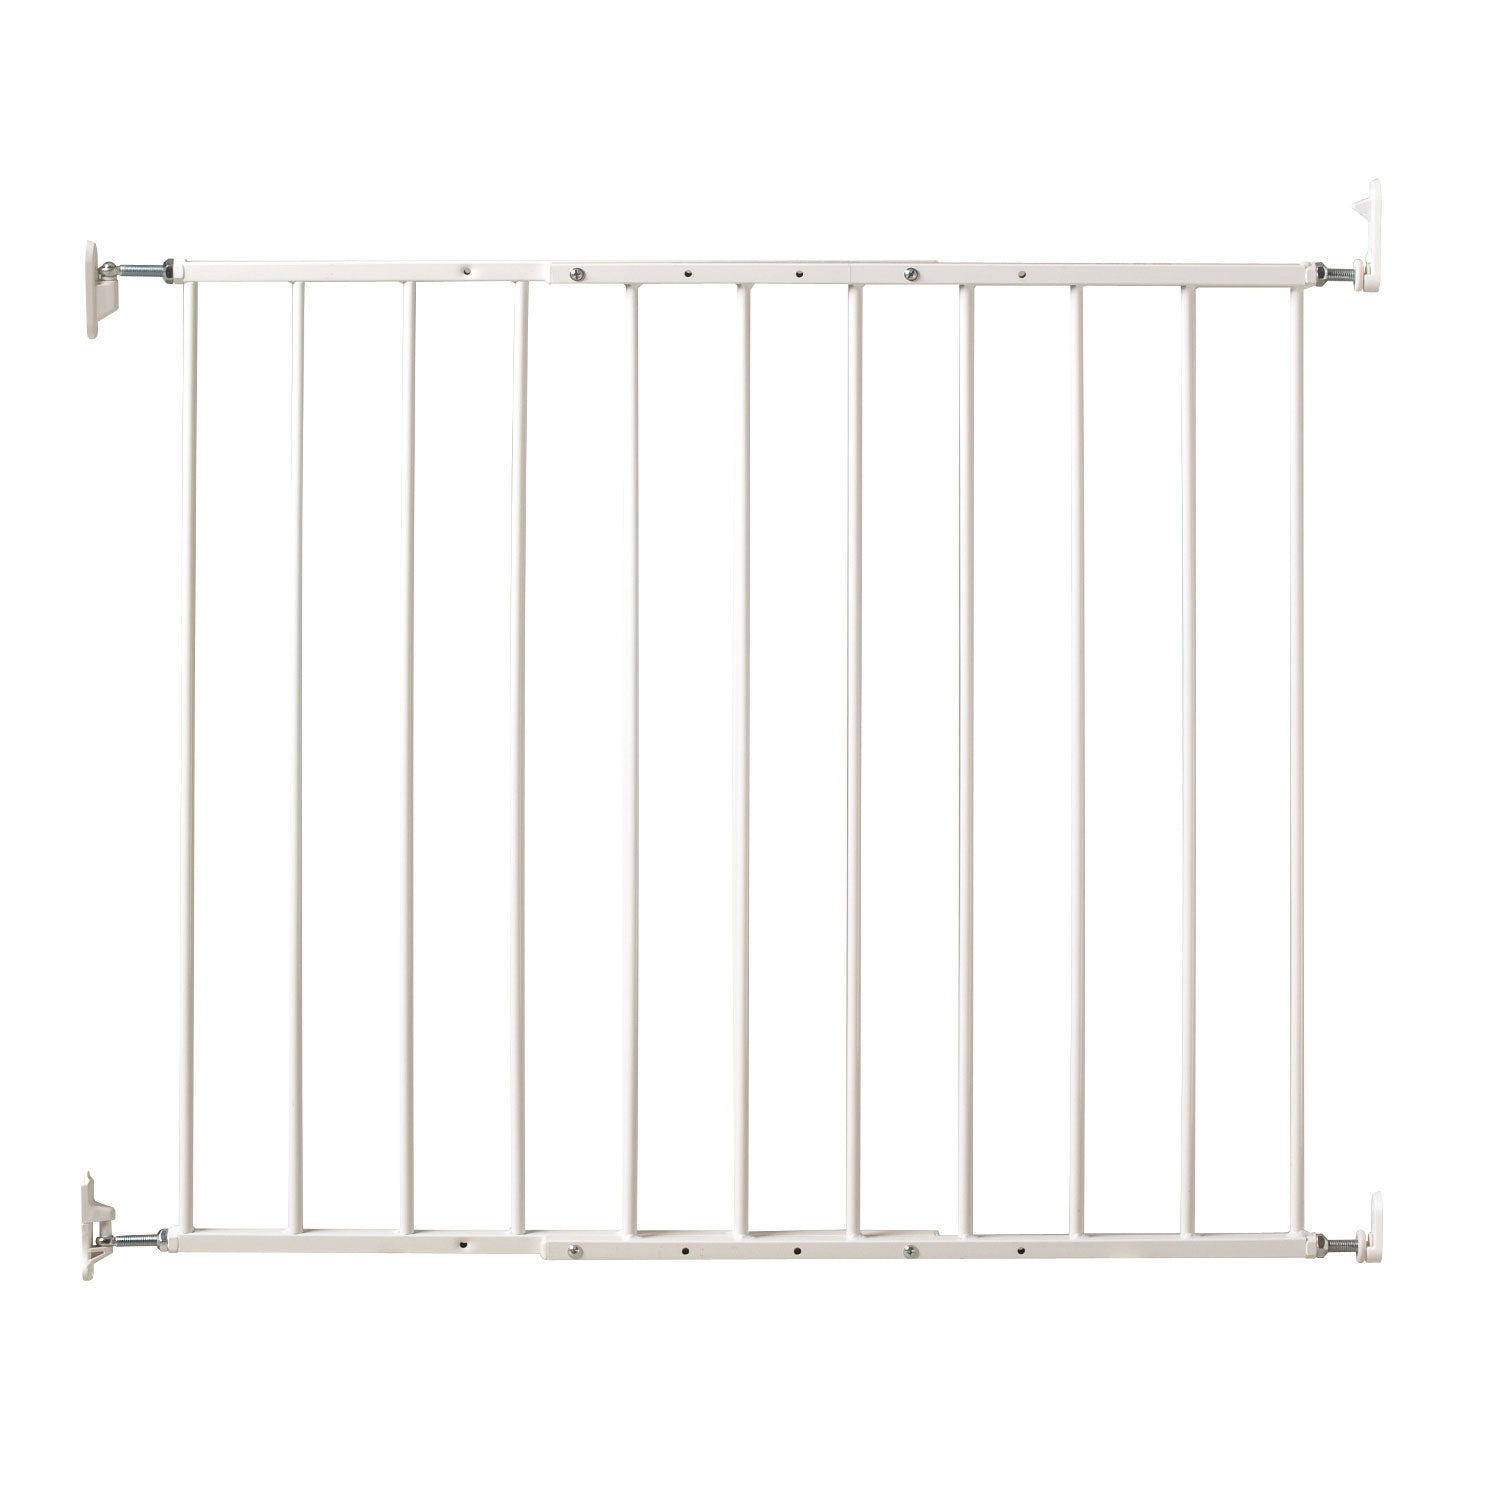 Kidco Pg5200 Command Wall Mounted Pet Gate